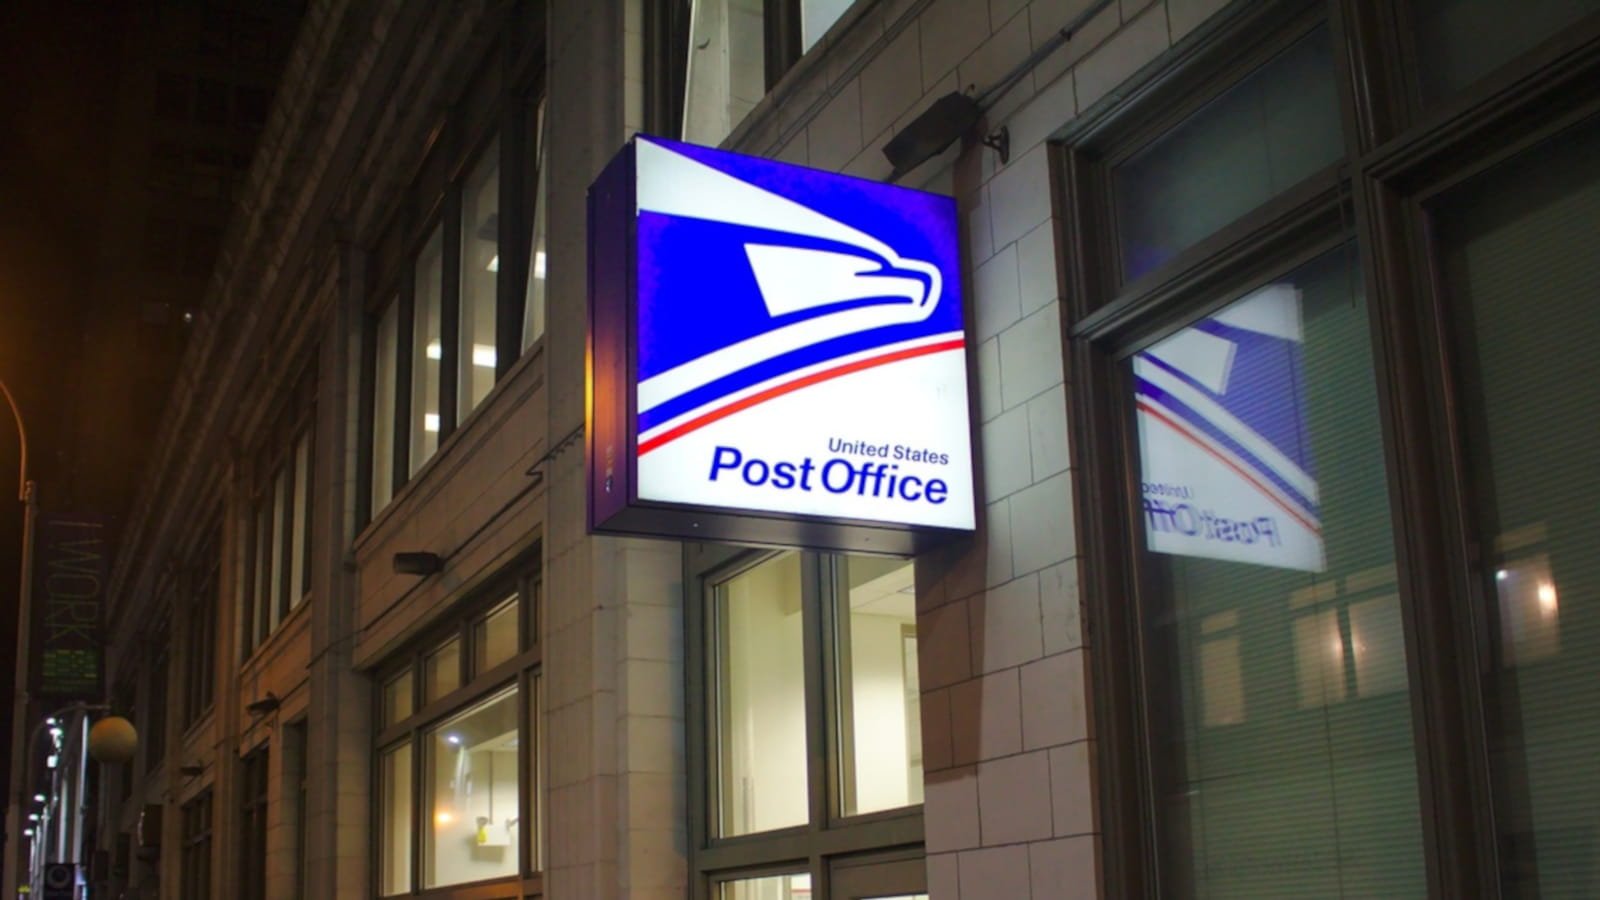 Security researchers analyzing phishing campaigns that target United States Postal Service (USPS) saw that the traffic to the fake domains is typicall